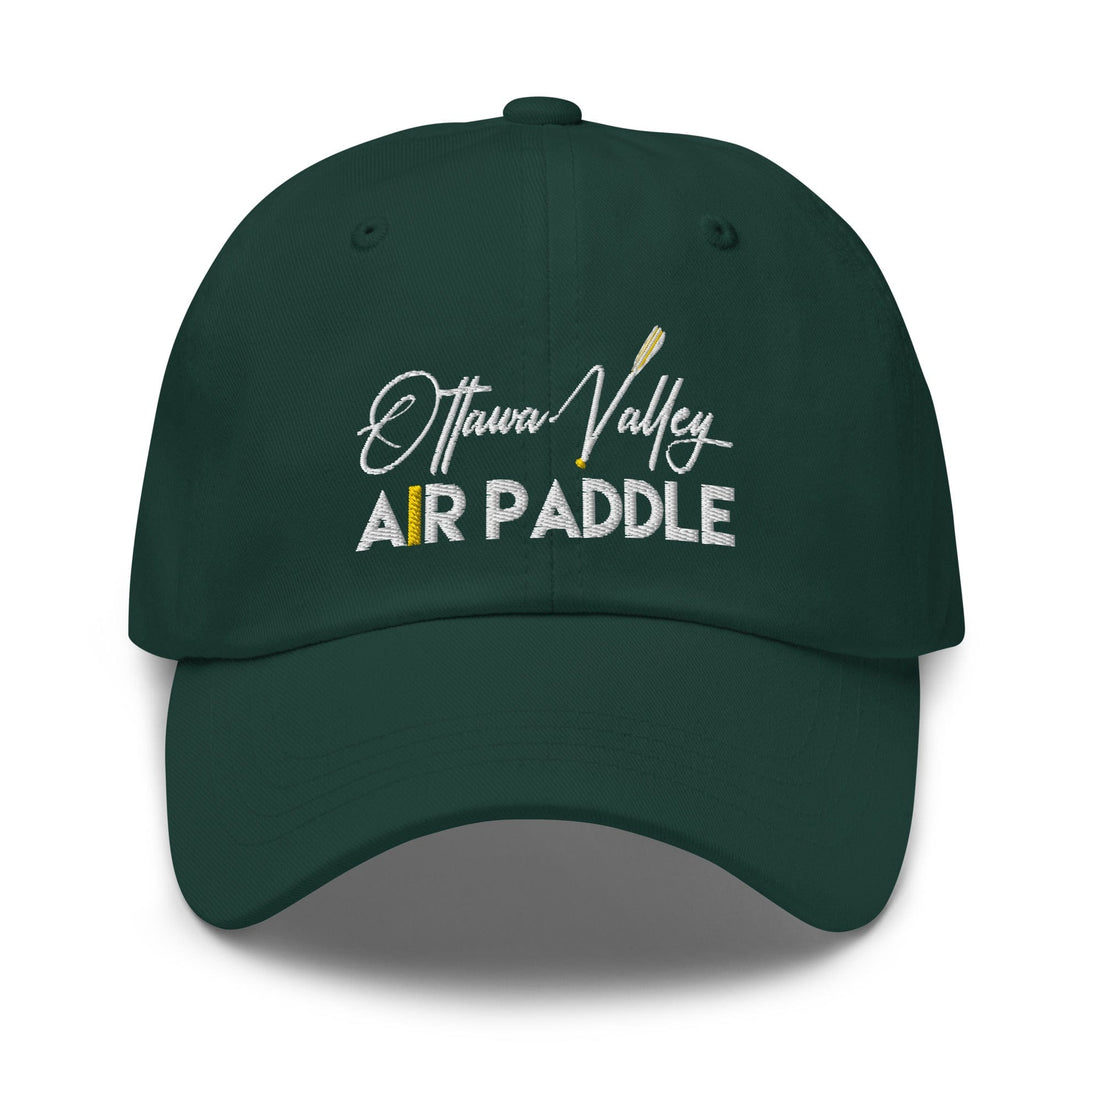 Ottawa Valley Air Paddle Spruce Ottawa Valley Air Paddle - Dad hat